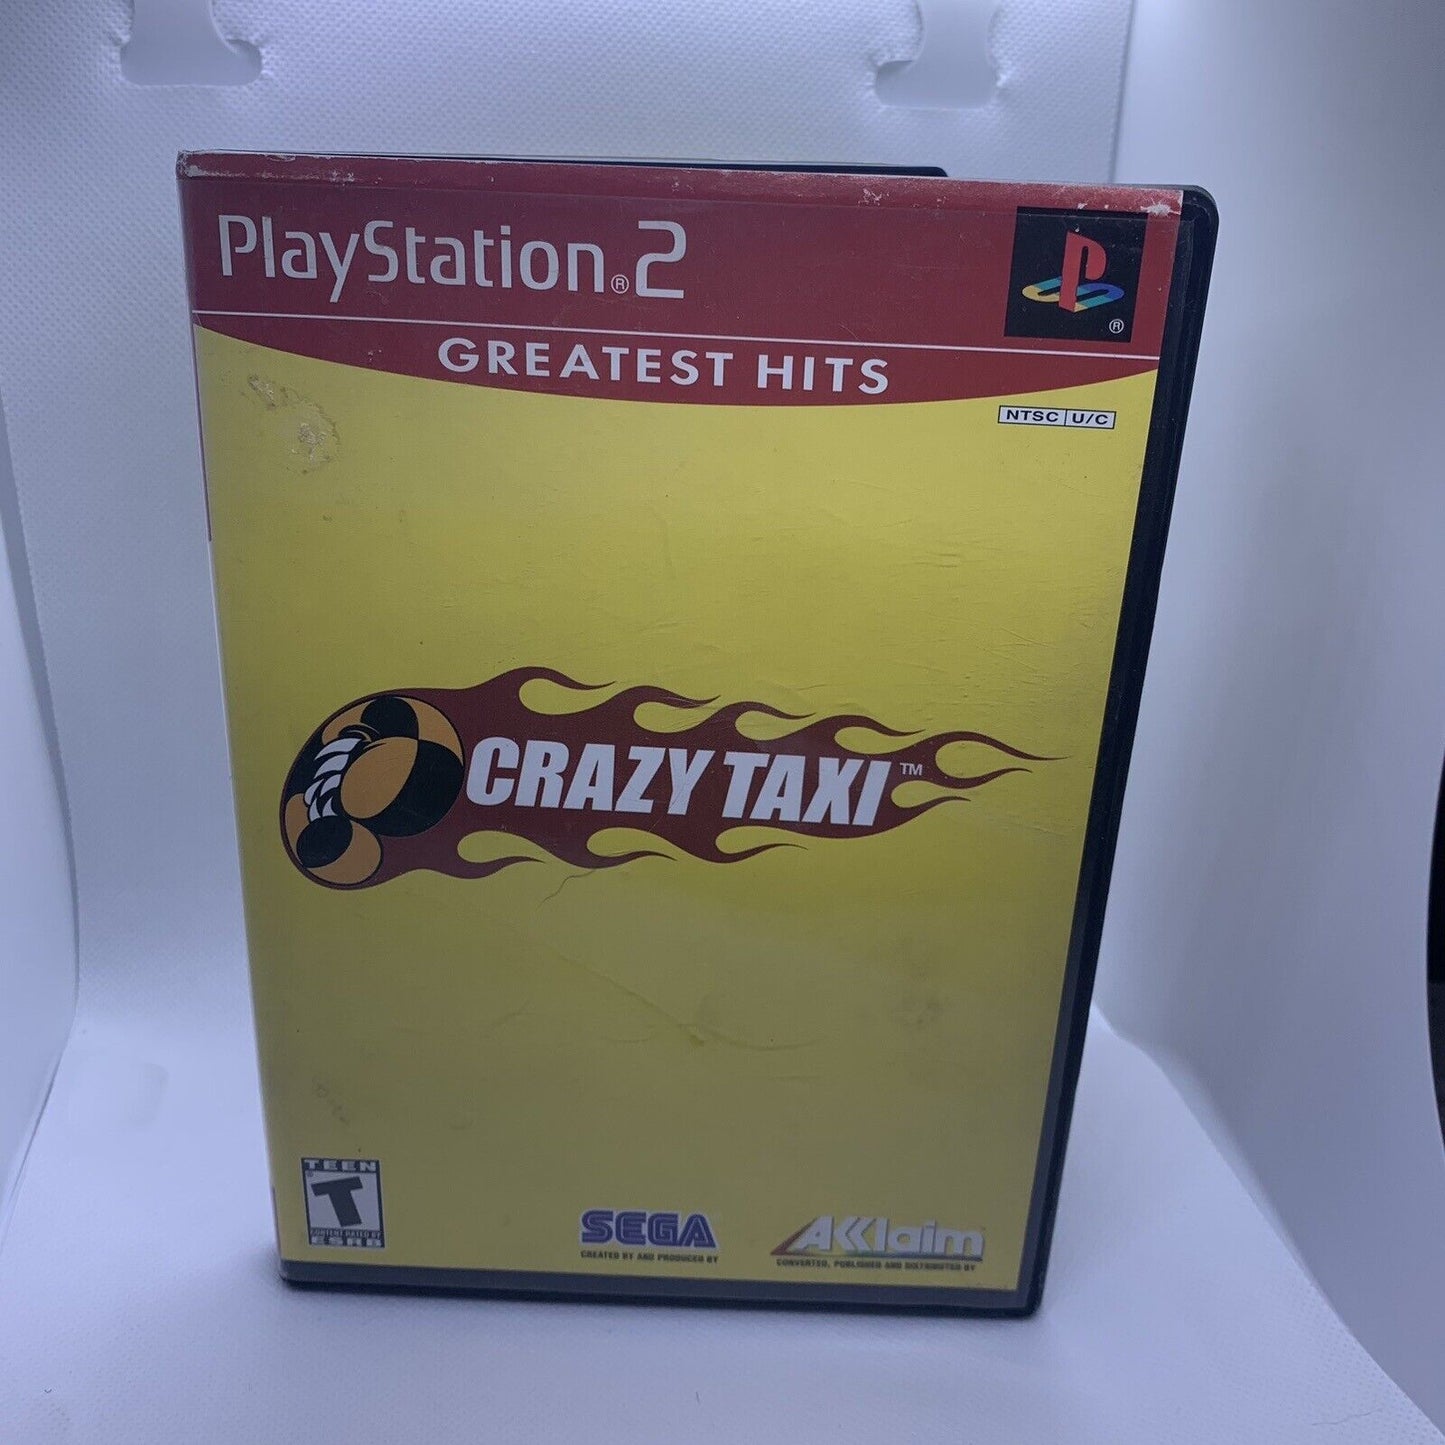 Crazy Taxi - Sony PLaystation 2, PS2 Video Game - COMPLETE CIB Tested, Working!